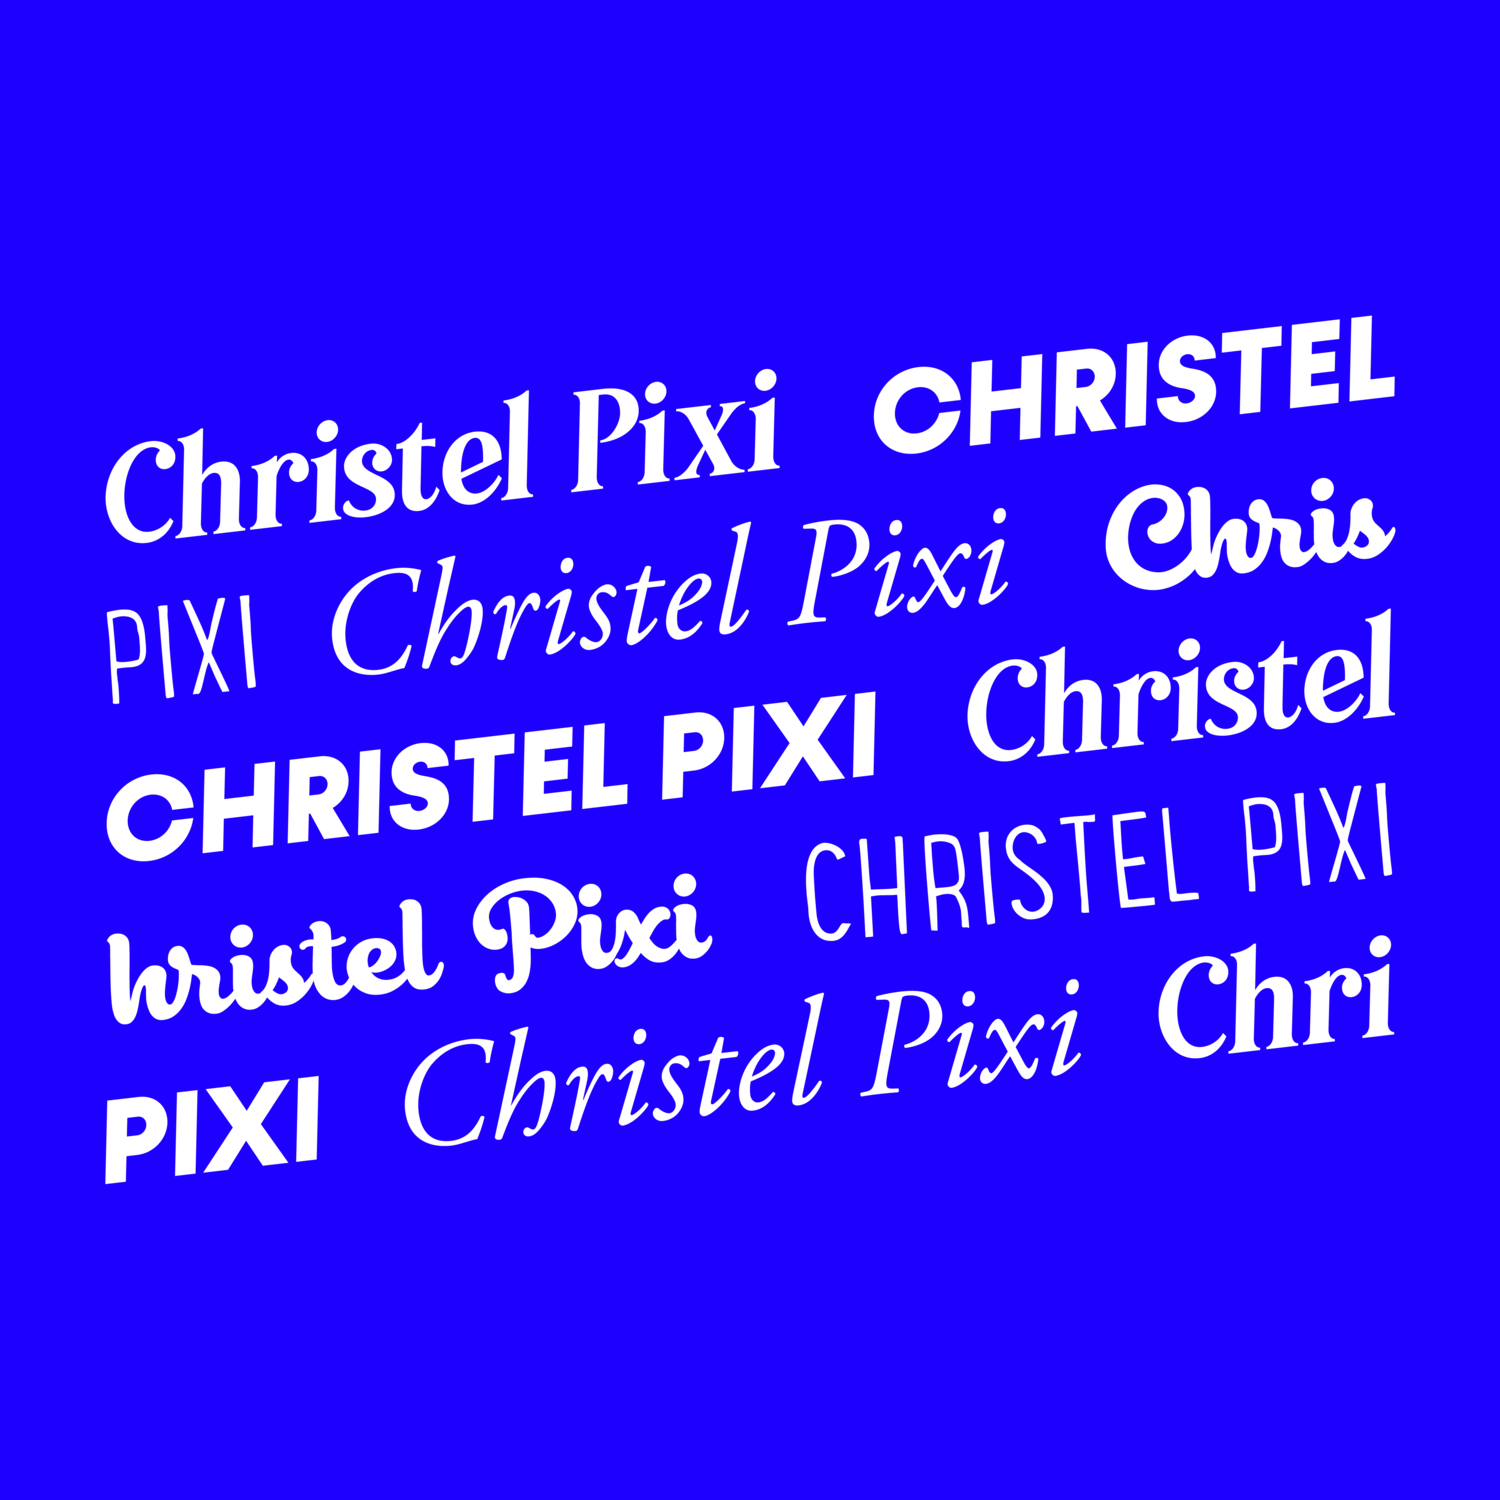 Welcome to Christel Pixi